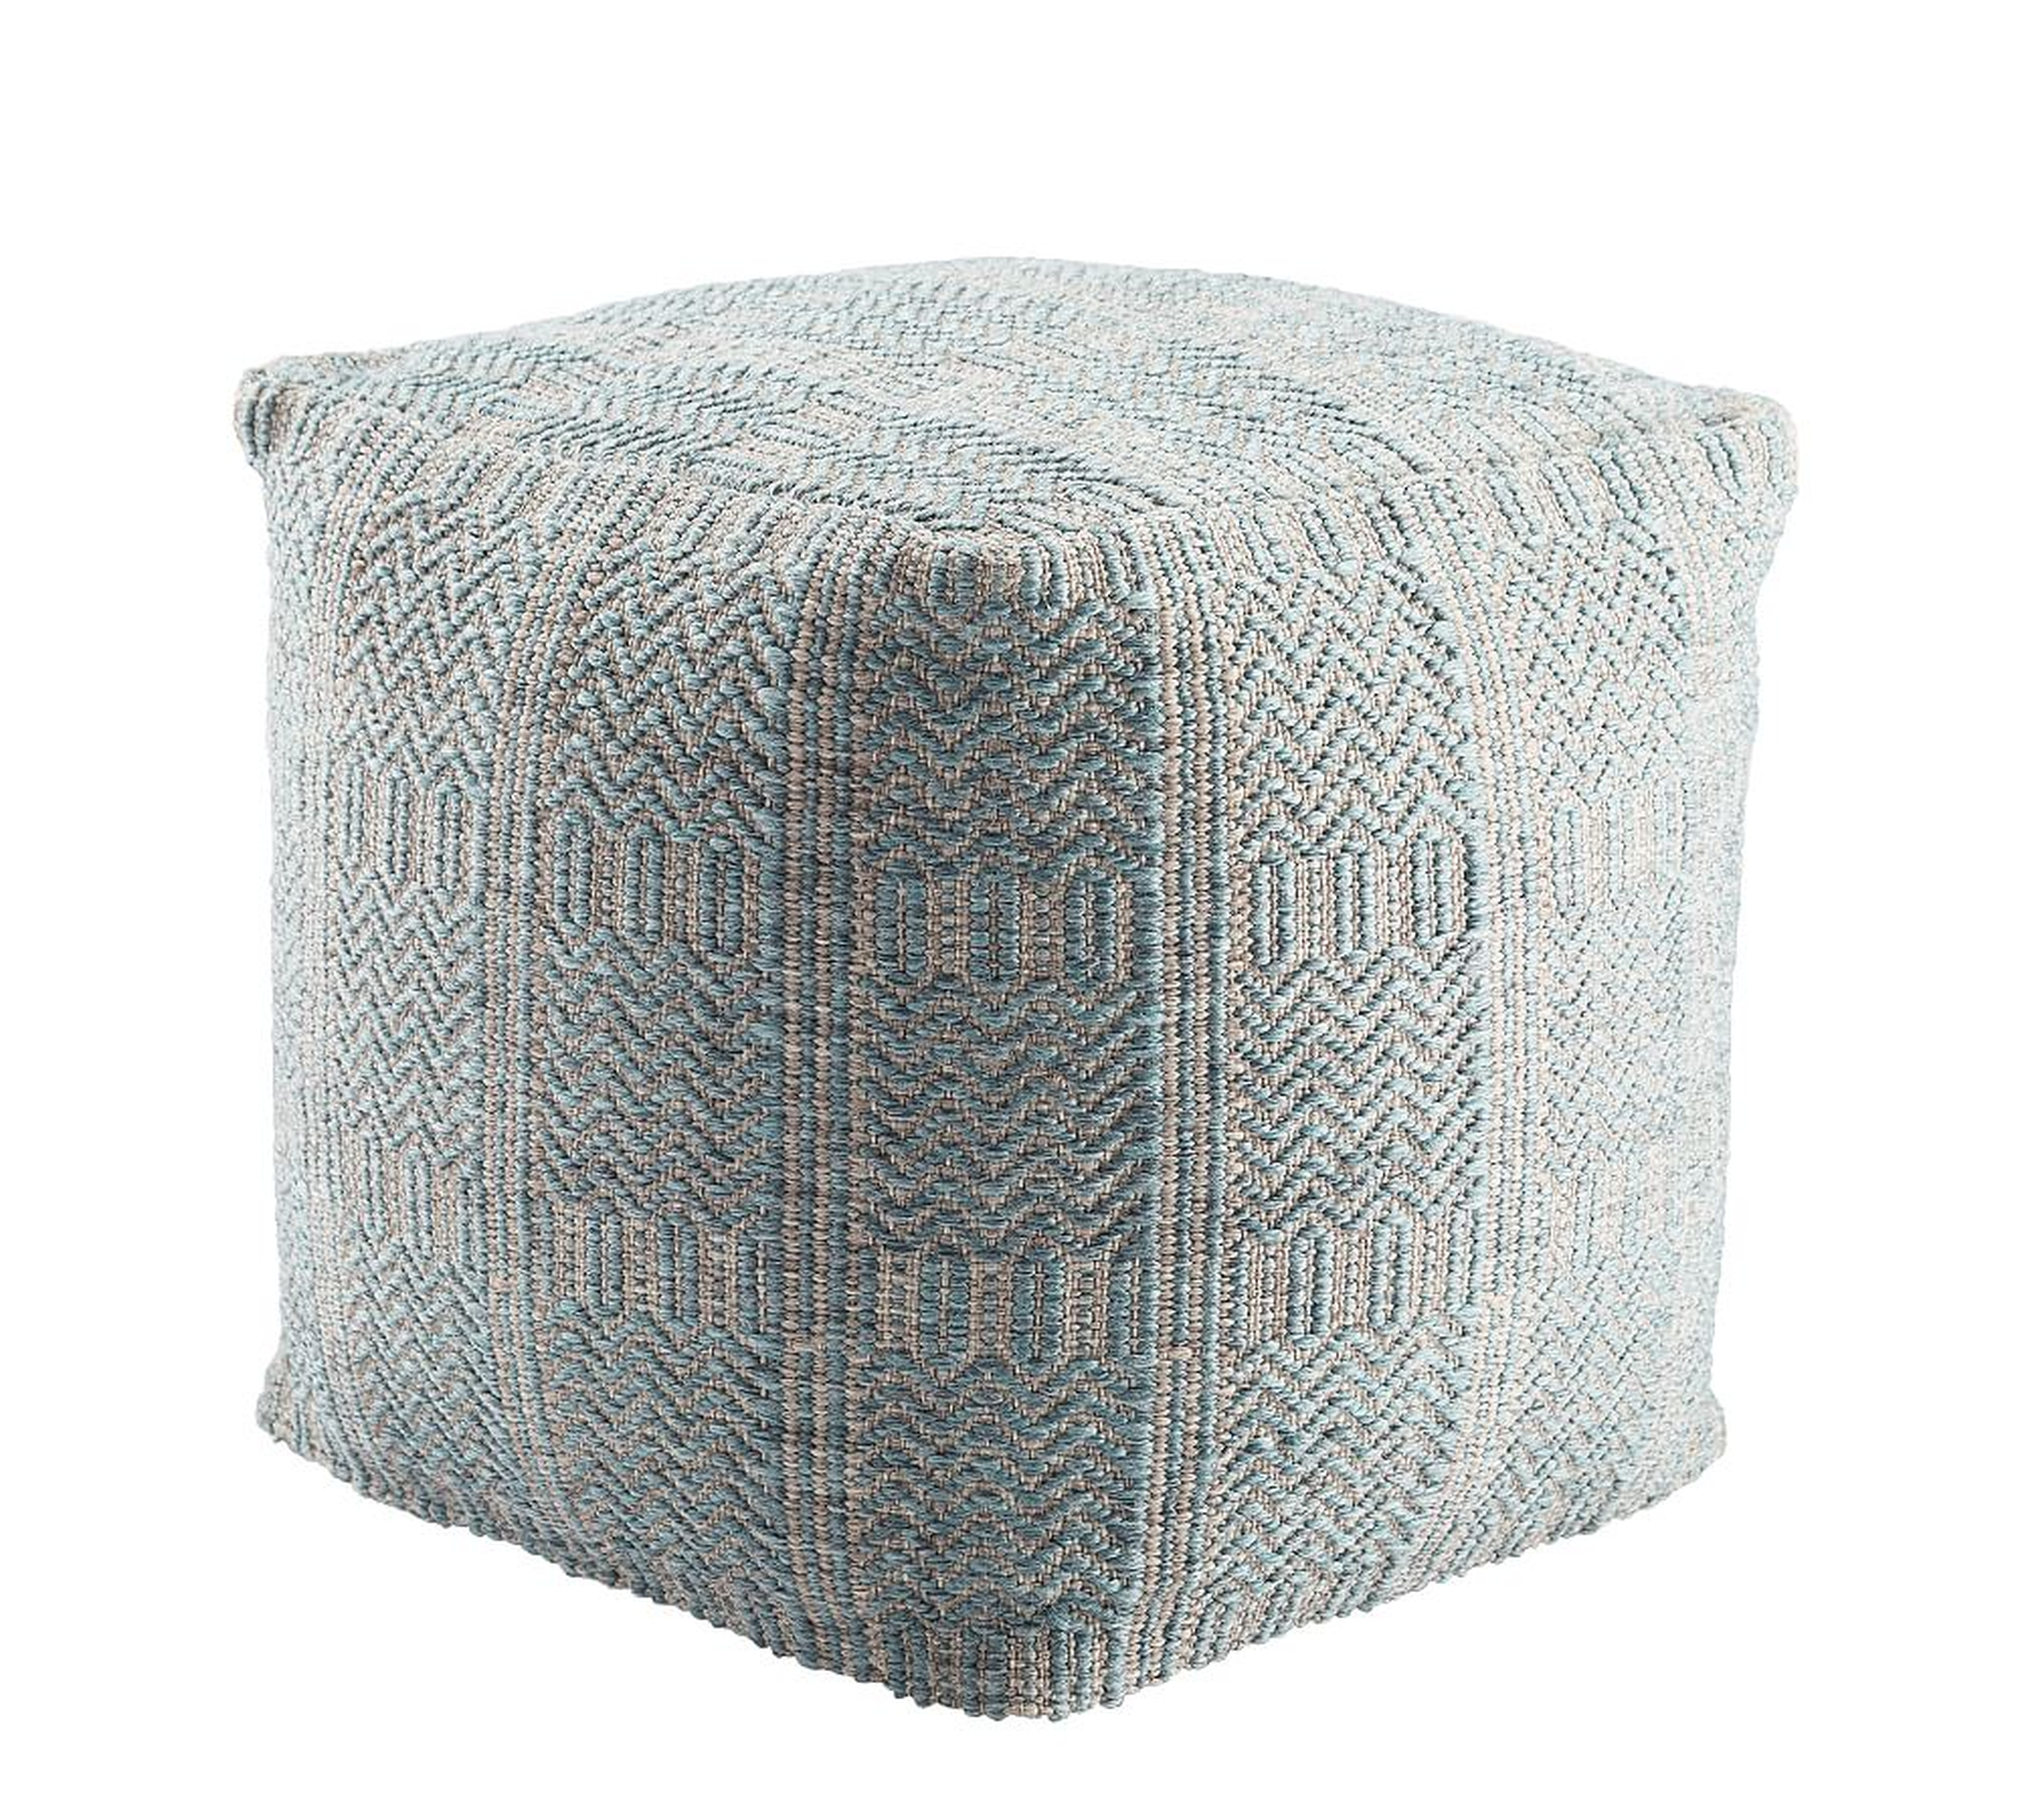 Jean Handwoven Indoor/Outdoor Pouf, 18" x 18" x 18", Gray/Blue - Pottery Barn